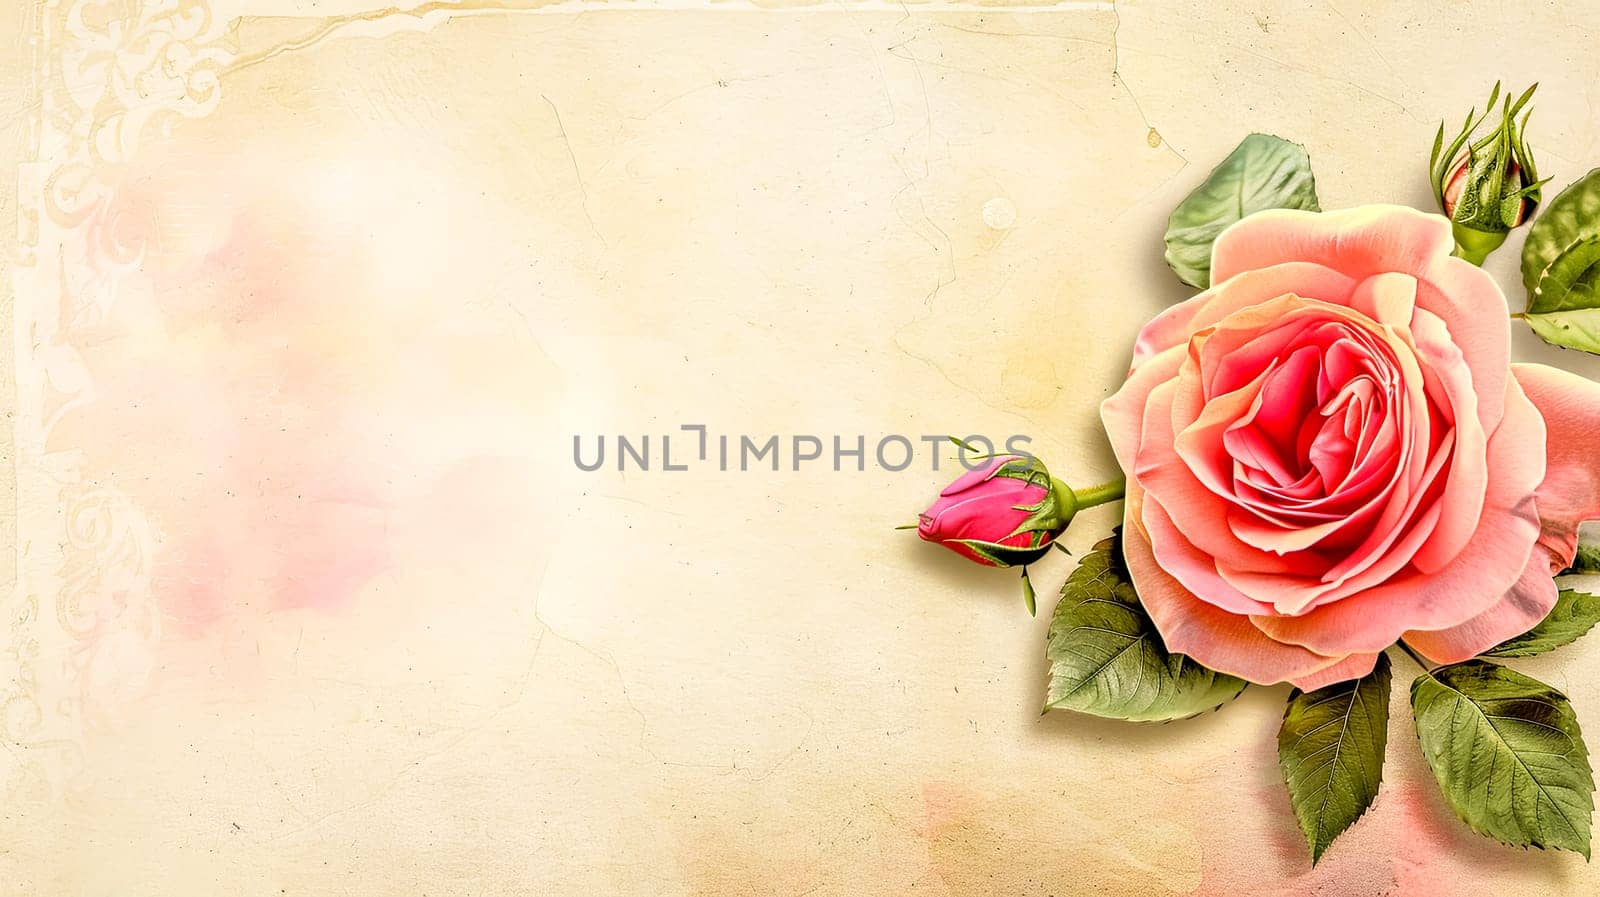 Vintage floral background with roses by Edophoto